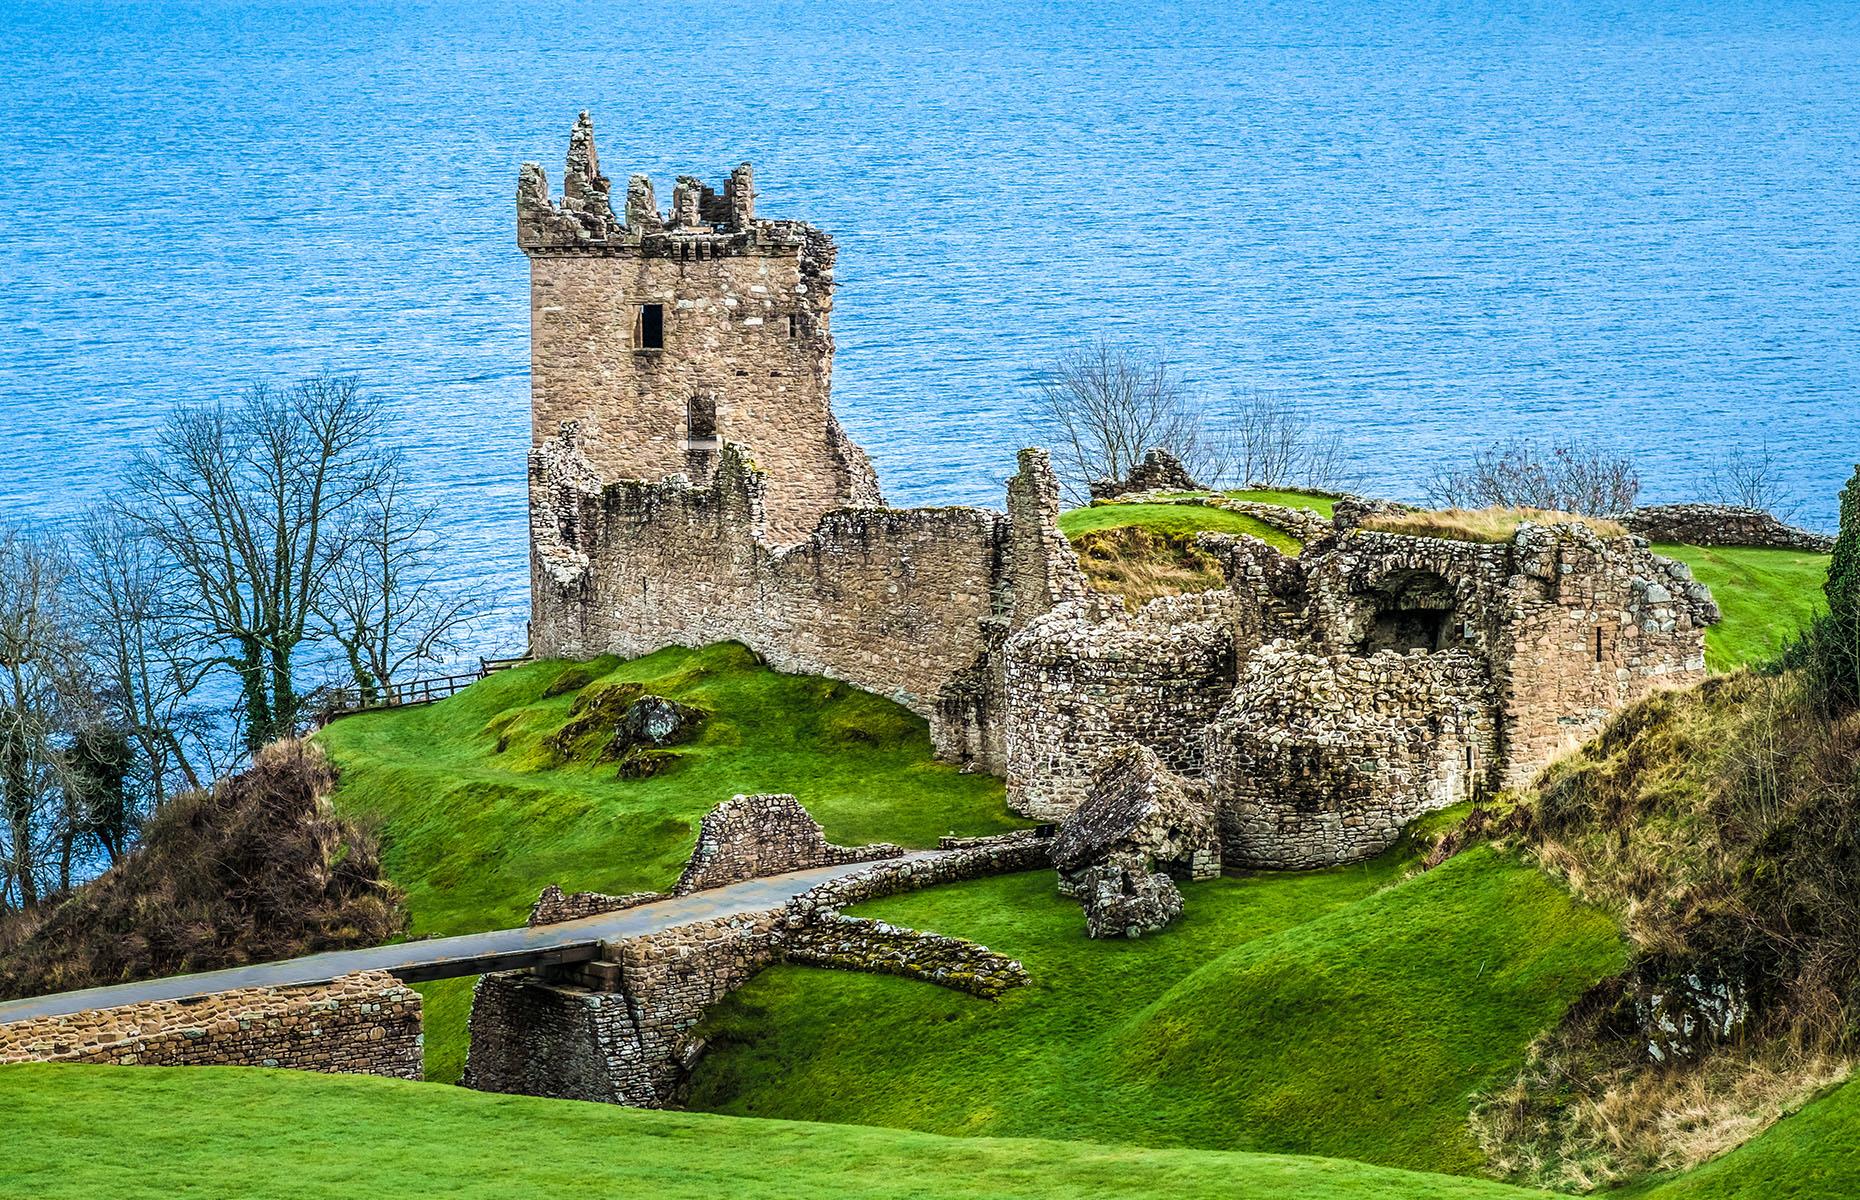 <p>They may be on the well-trodden tourist trail, but Urquhart Castle and Loch Ness deserve a visit. Favorite haunts for Inverness locals include the Ness Islands, connected by a series of pretty suspension bridges in the middle of the river.</p>  <p>Afterward, head to Leakey’s vast second-hand bookstore, then the Milk Bar for handmade Highland ice cream.</p>